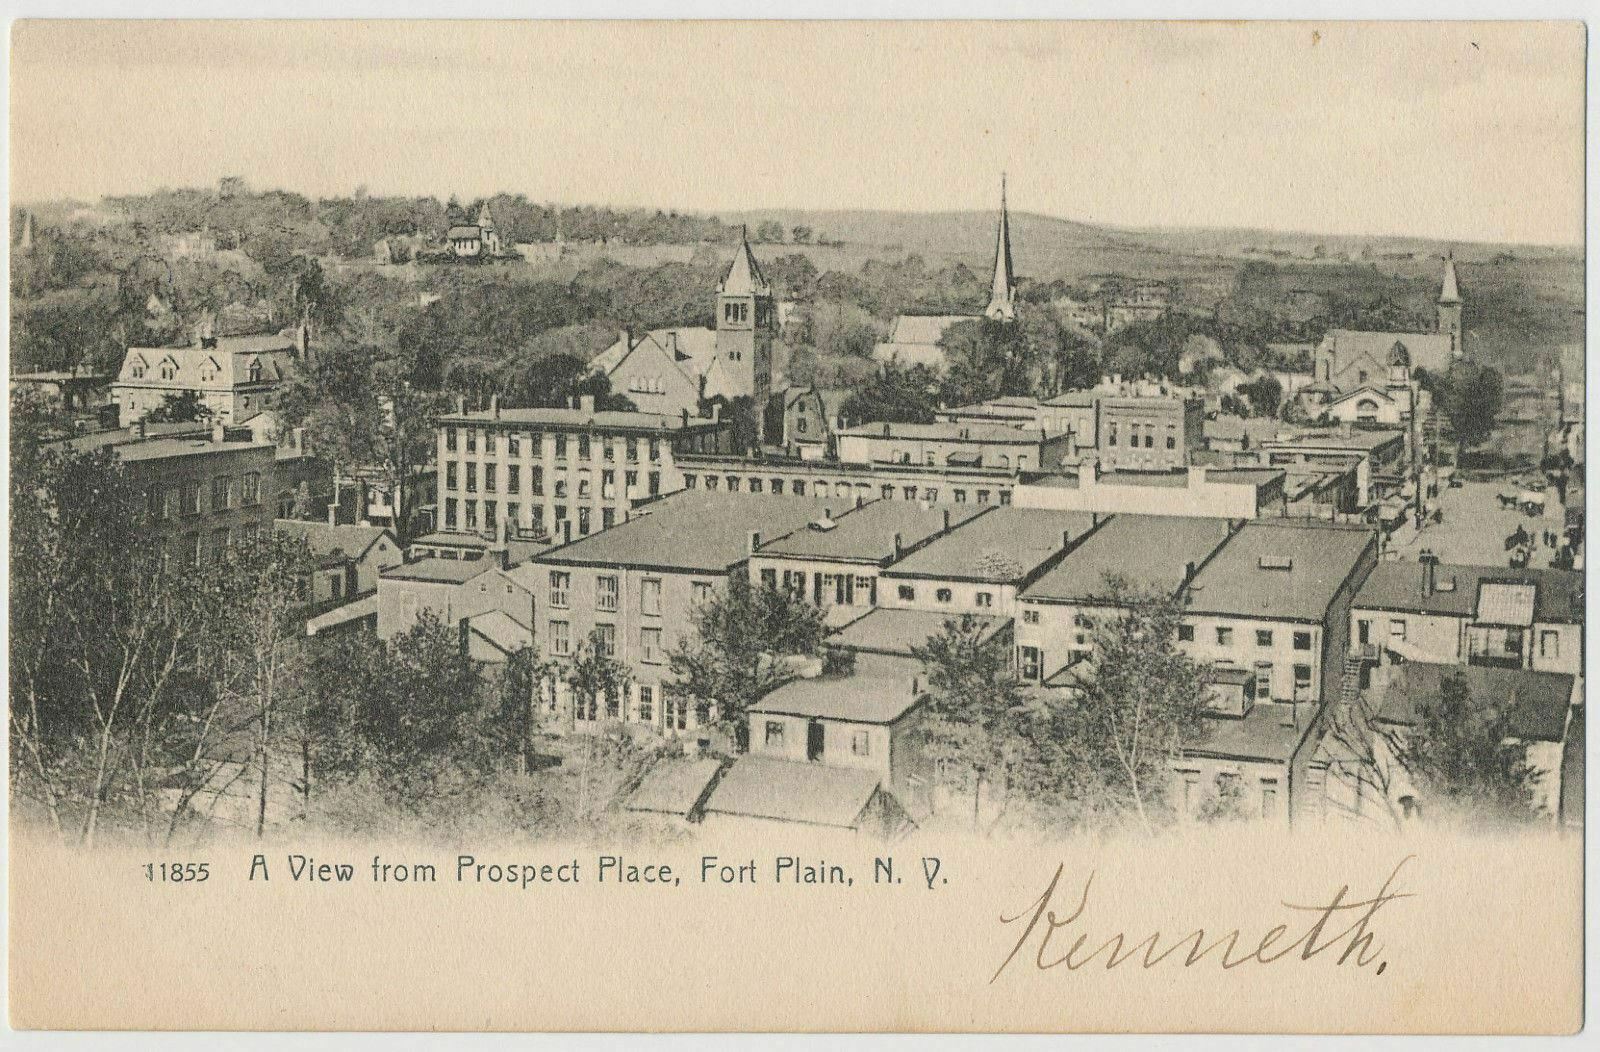 Birdseye View from Prospect Place, Fort Plain, New York 1906